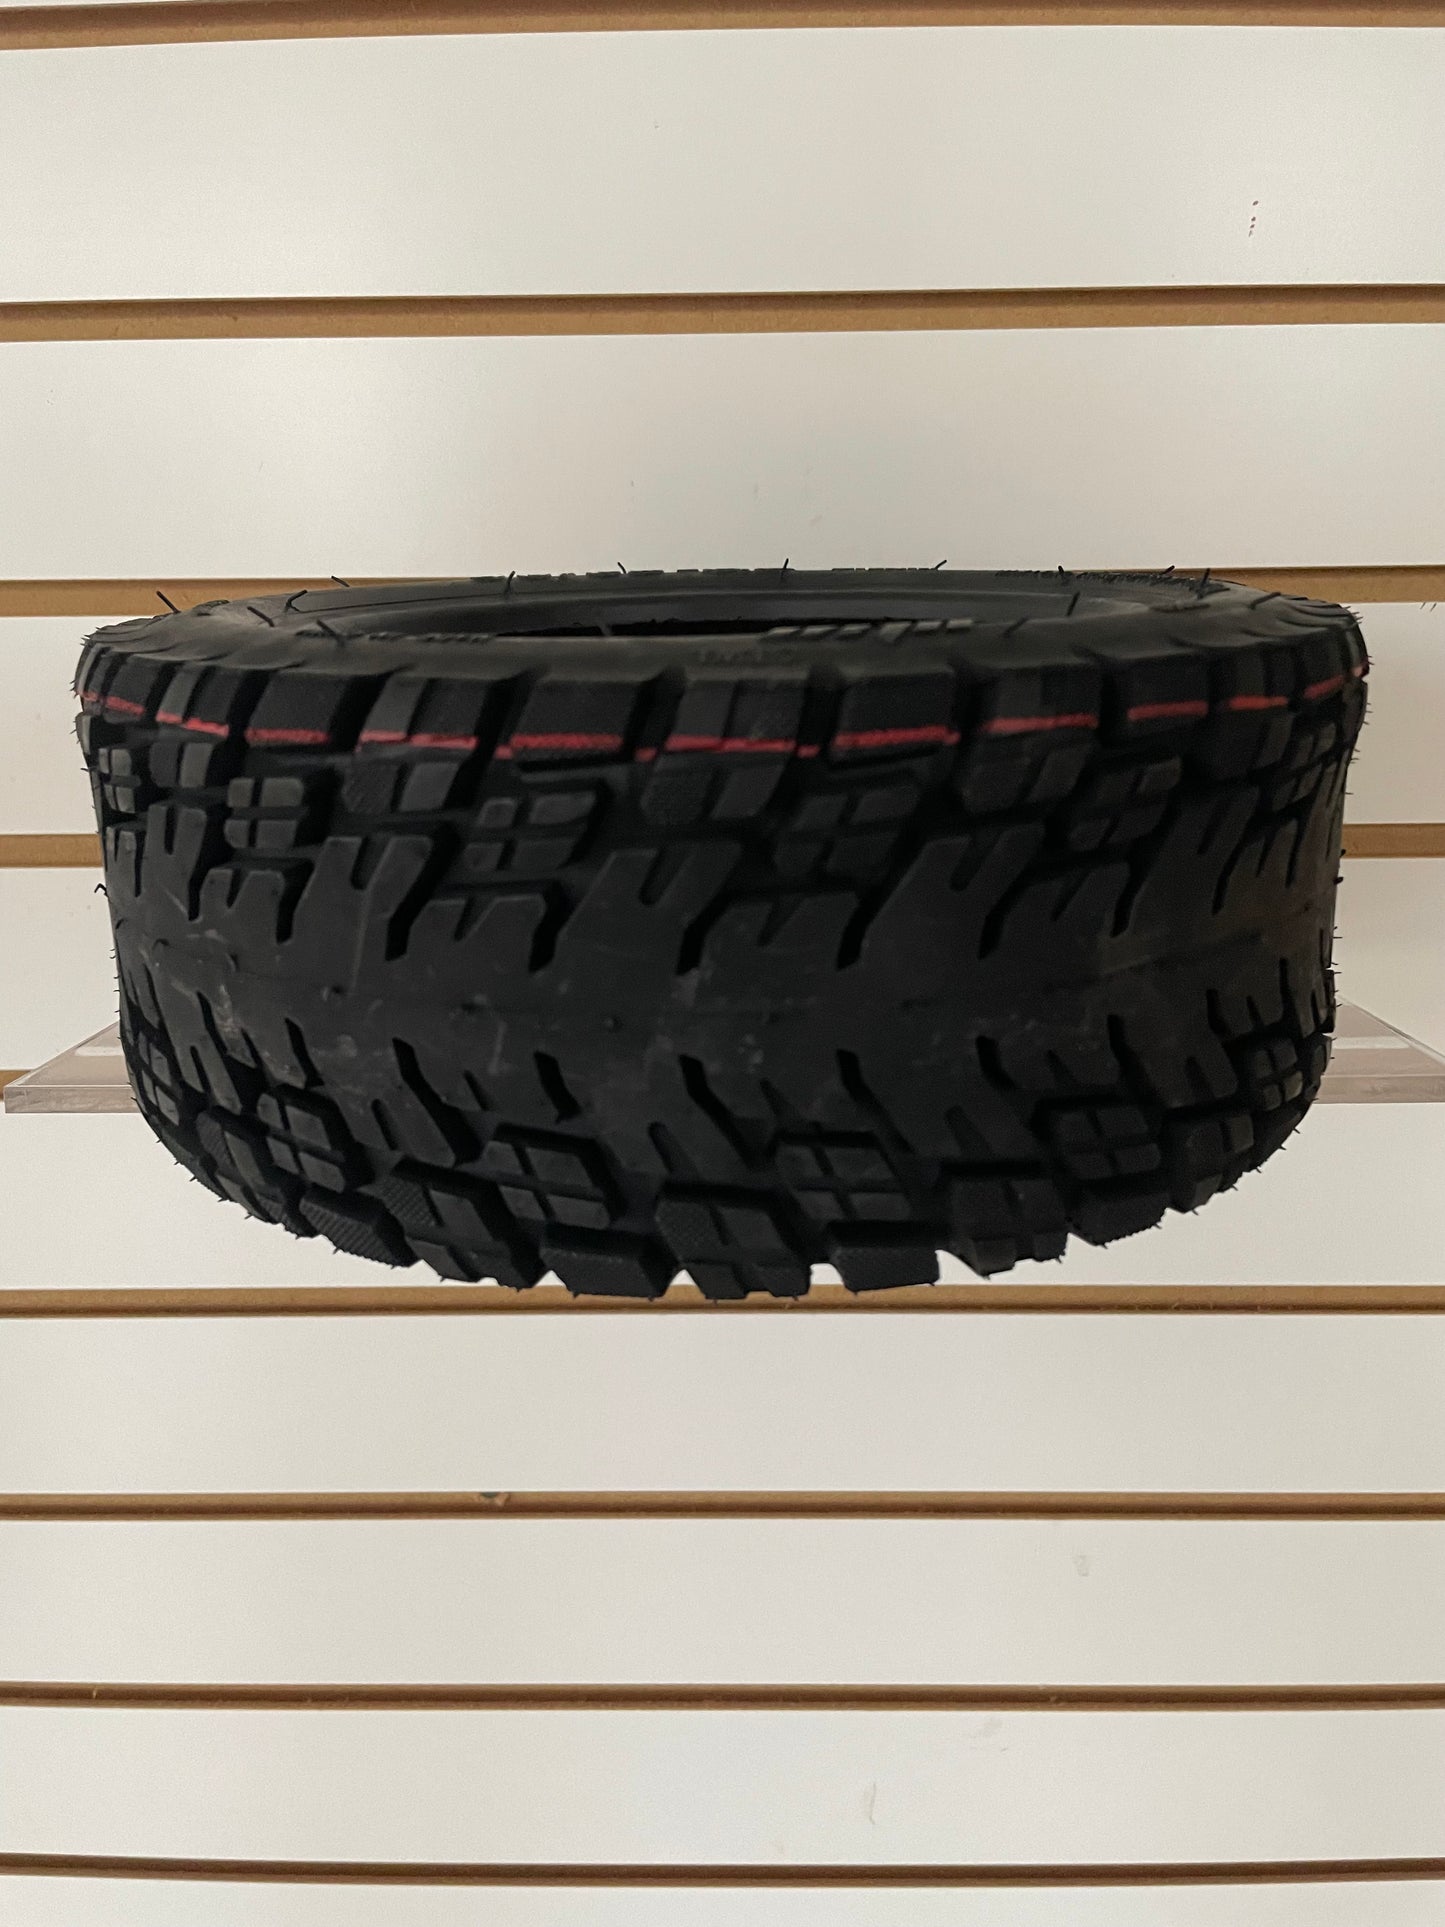 ULIP 11 inch 90/65-65 On-Road/Off-Road Tubeless Tire